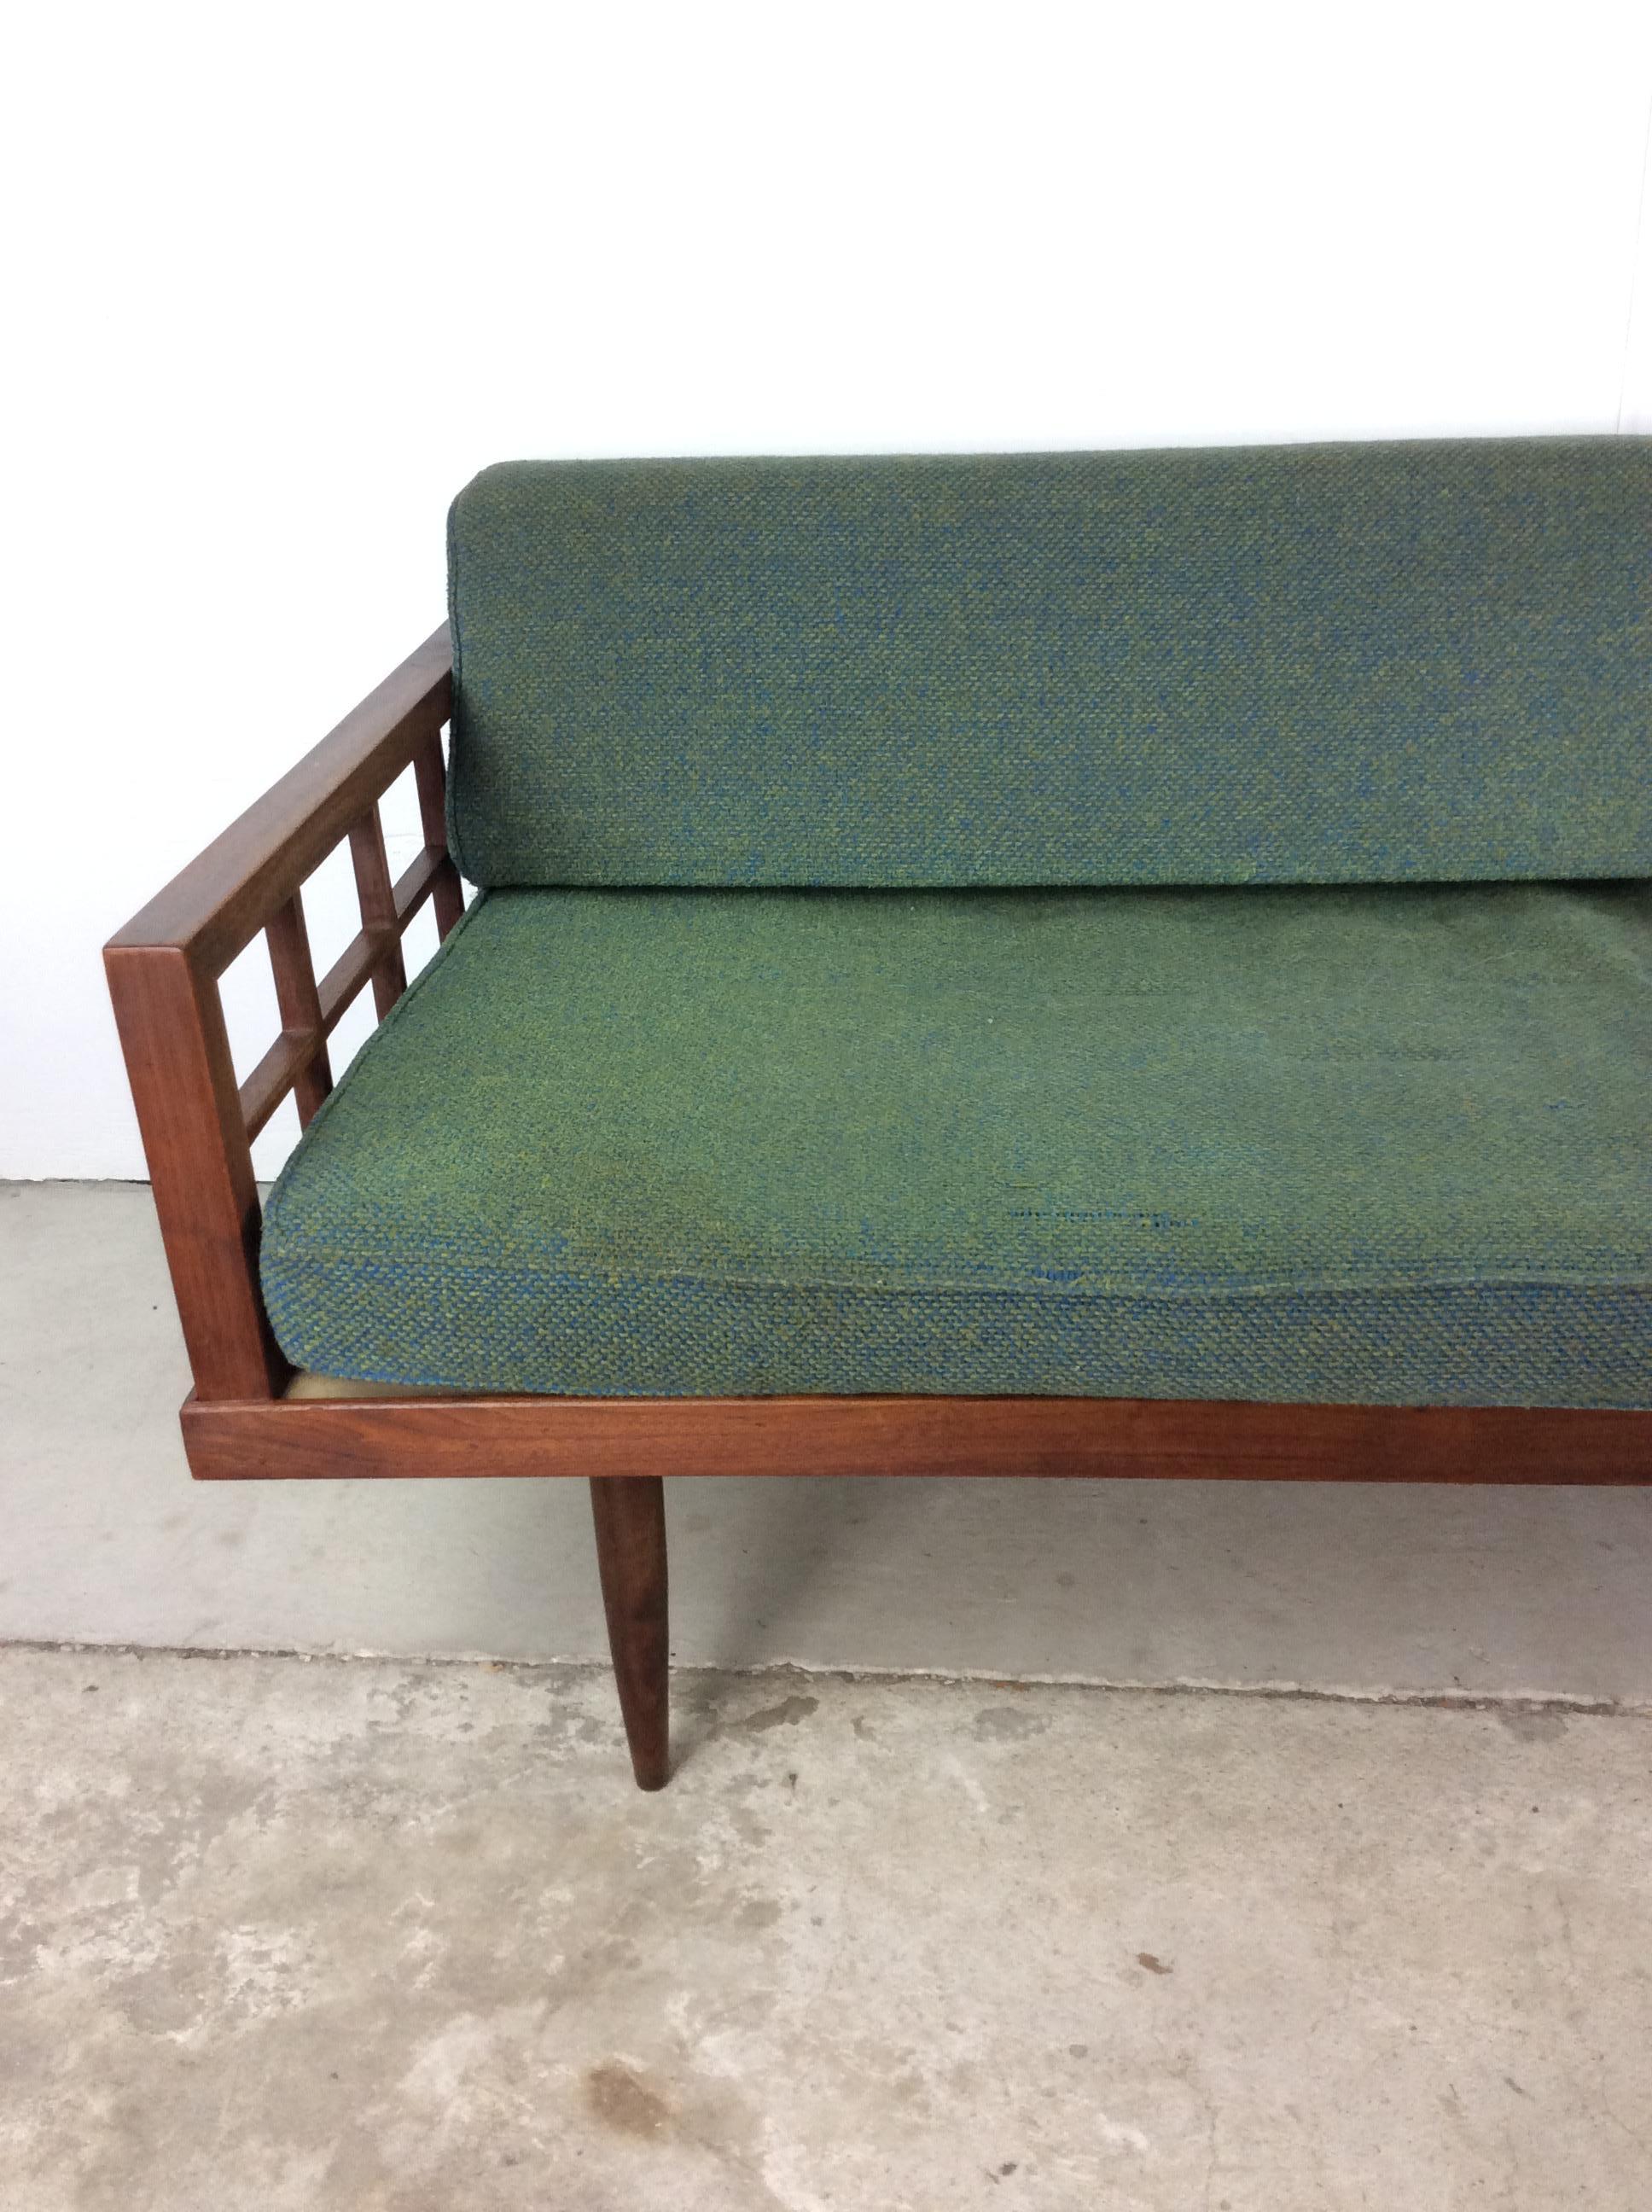 This mid century modern daybed sofa features hardwood construction, beautiful walnut finish, removable cushions with original upholstery, unique lattice-style armrests, and tall tapered legs.

Complimentary slat bench end table & coffee table